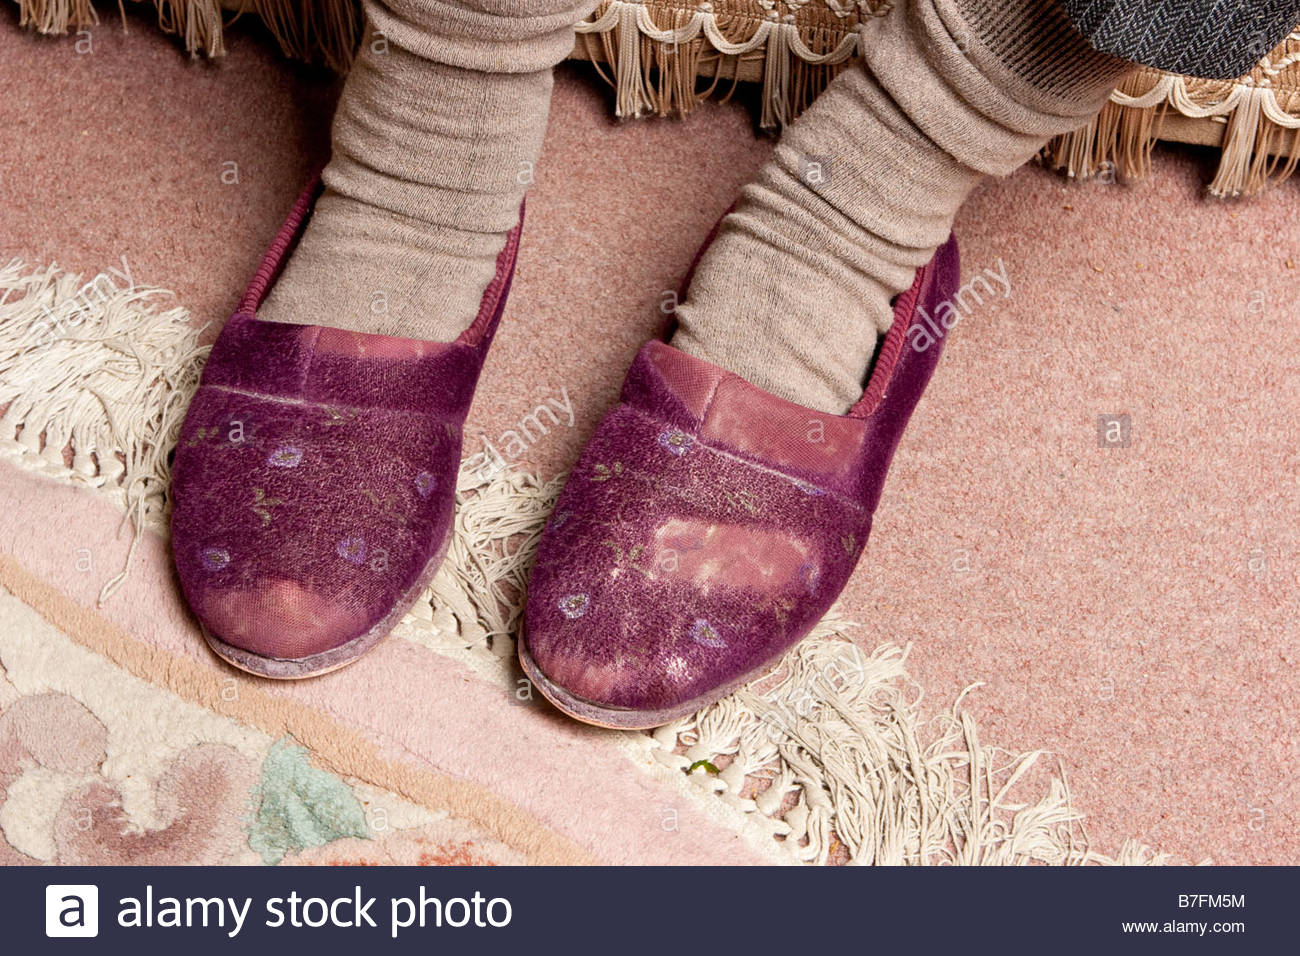 slippers for old woman